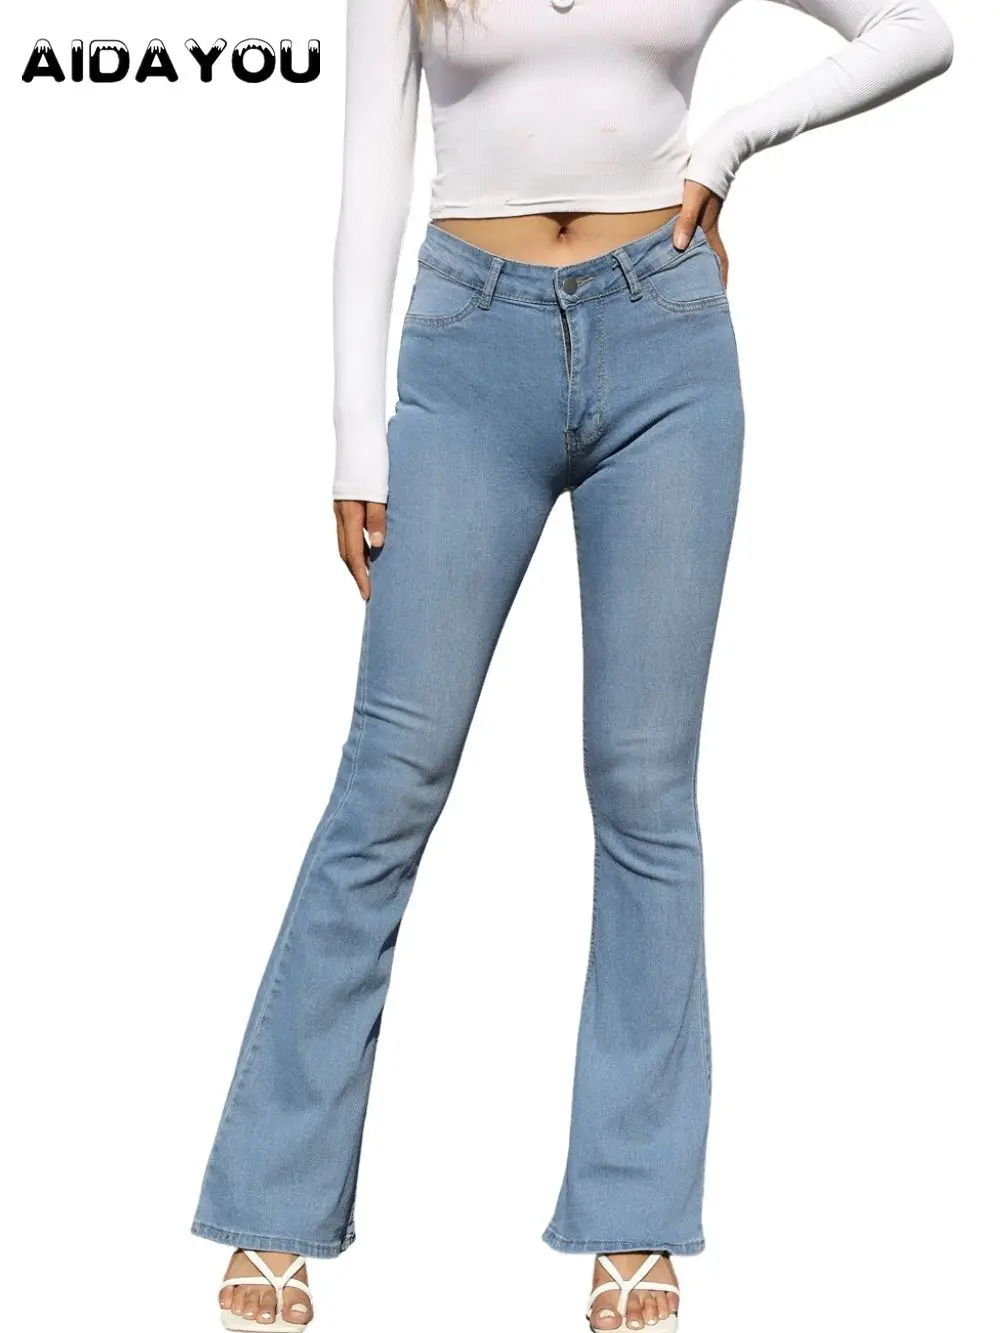 

Womens Flare Jeans For Tall Girl XXS to 2XL Perfect Fit Fashion Streetwear Long Denim Pants Boot Cut Jean Bell Bottom